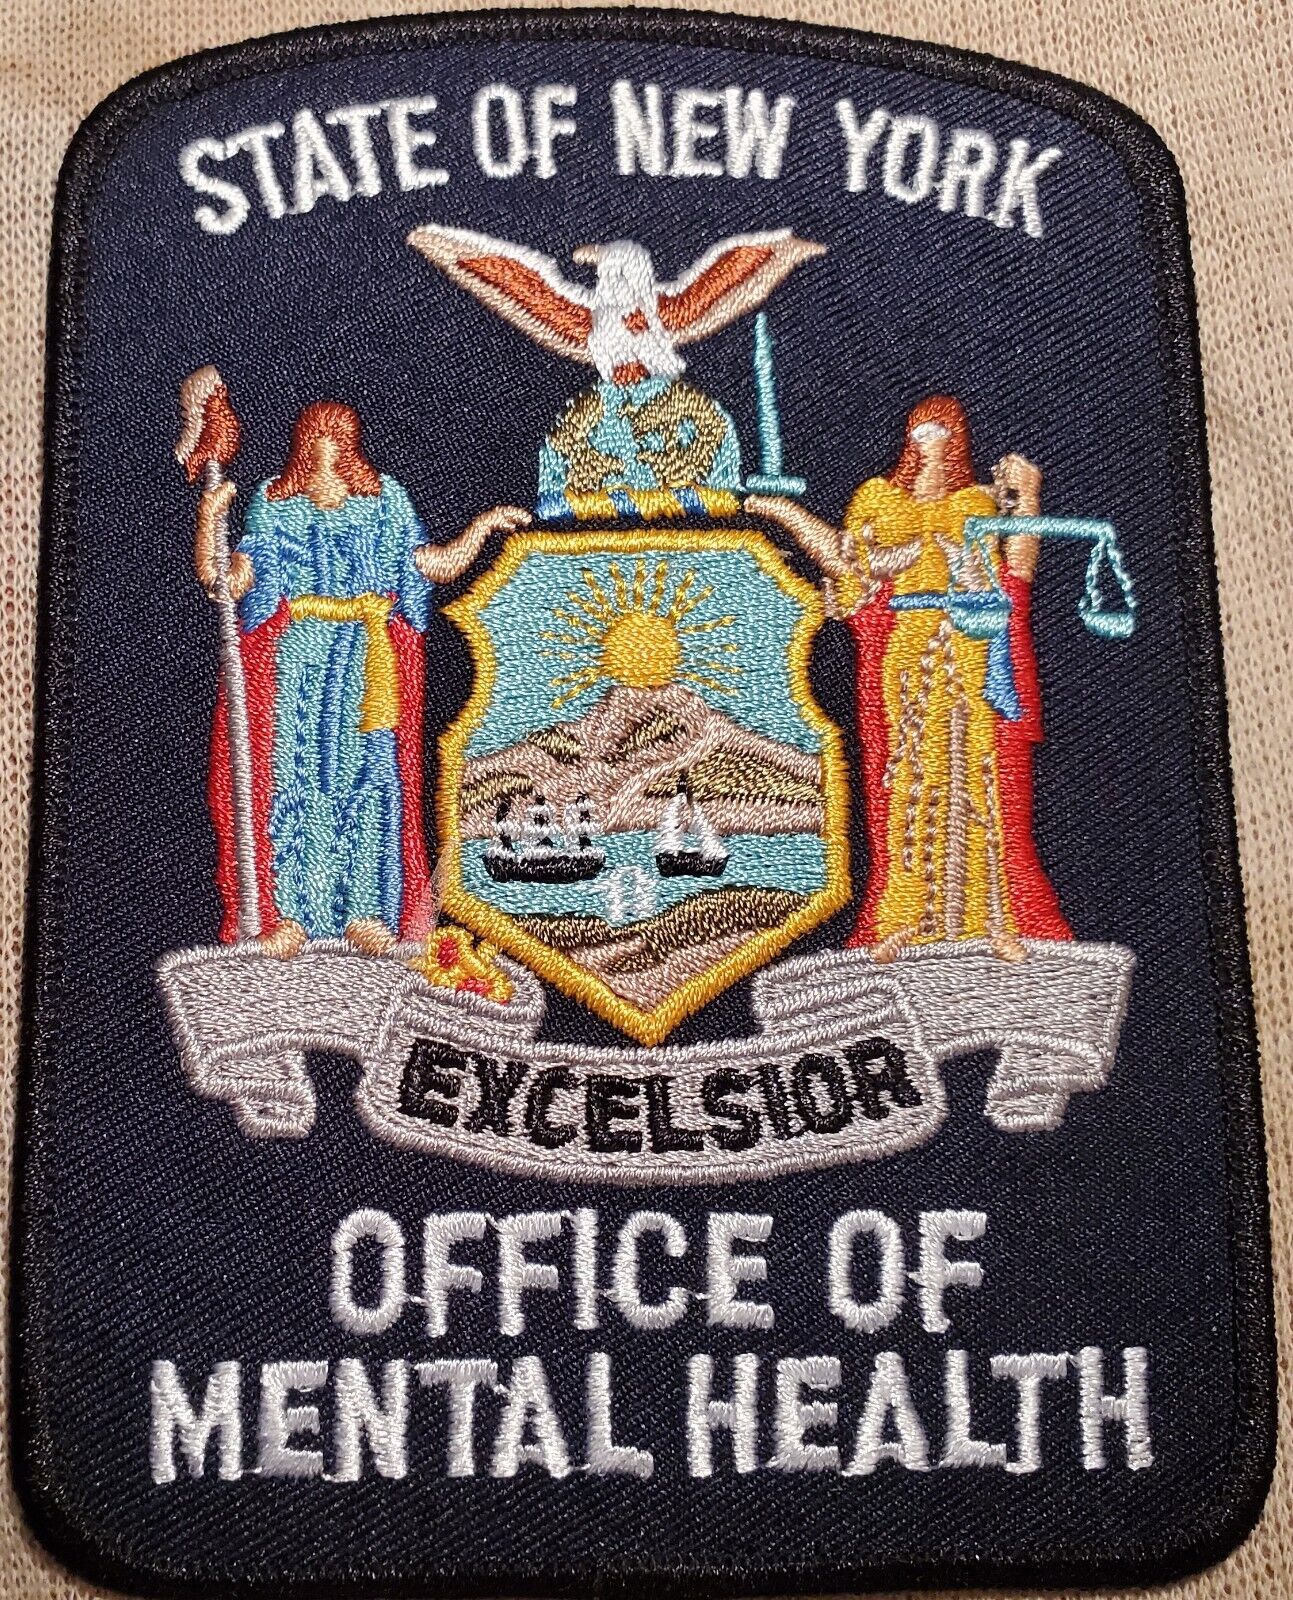 NY New York State Office of Mental Health Shoulder Patch